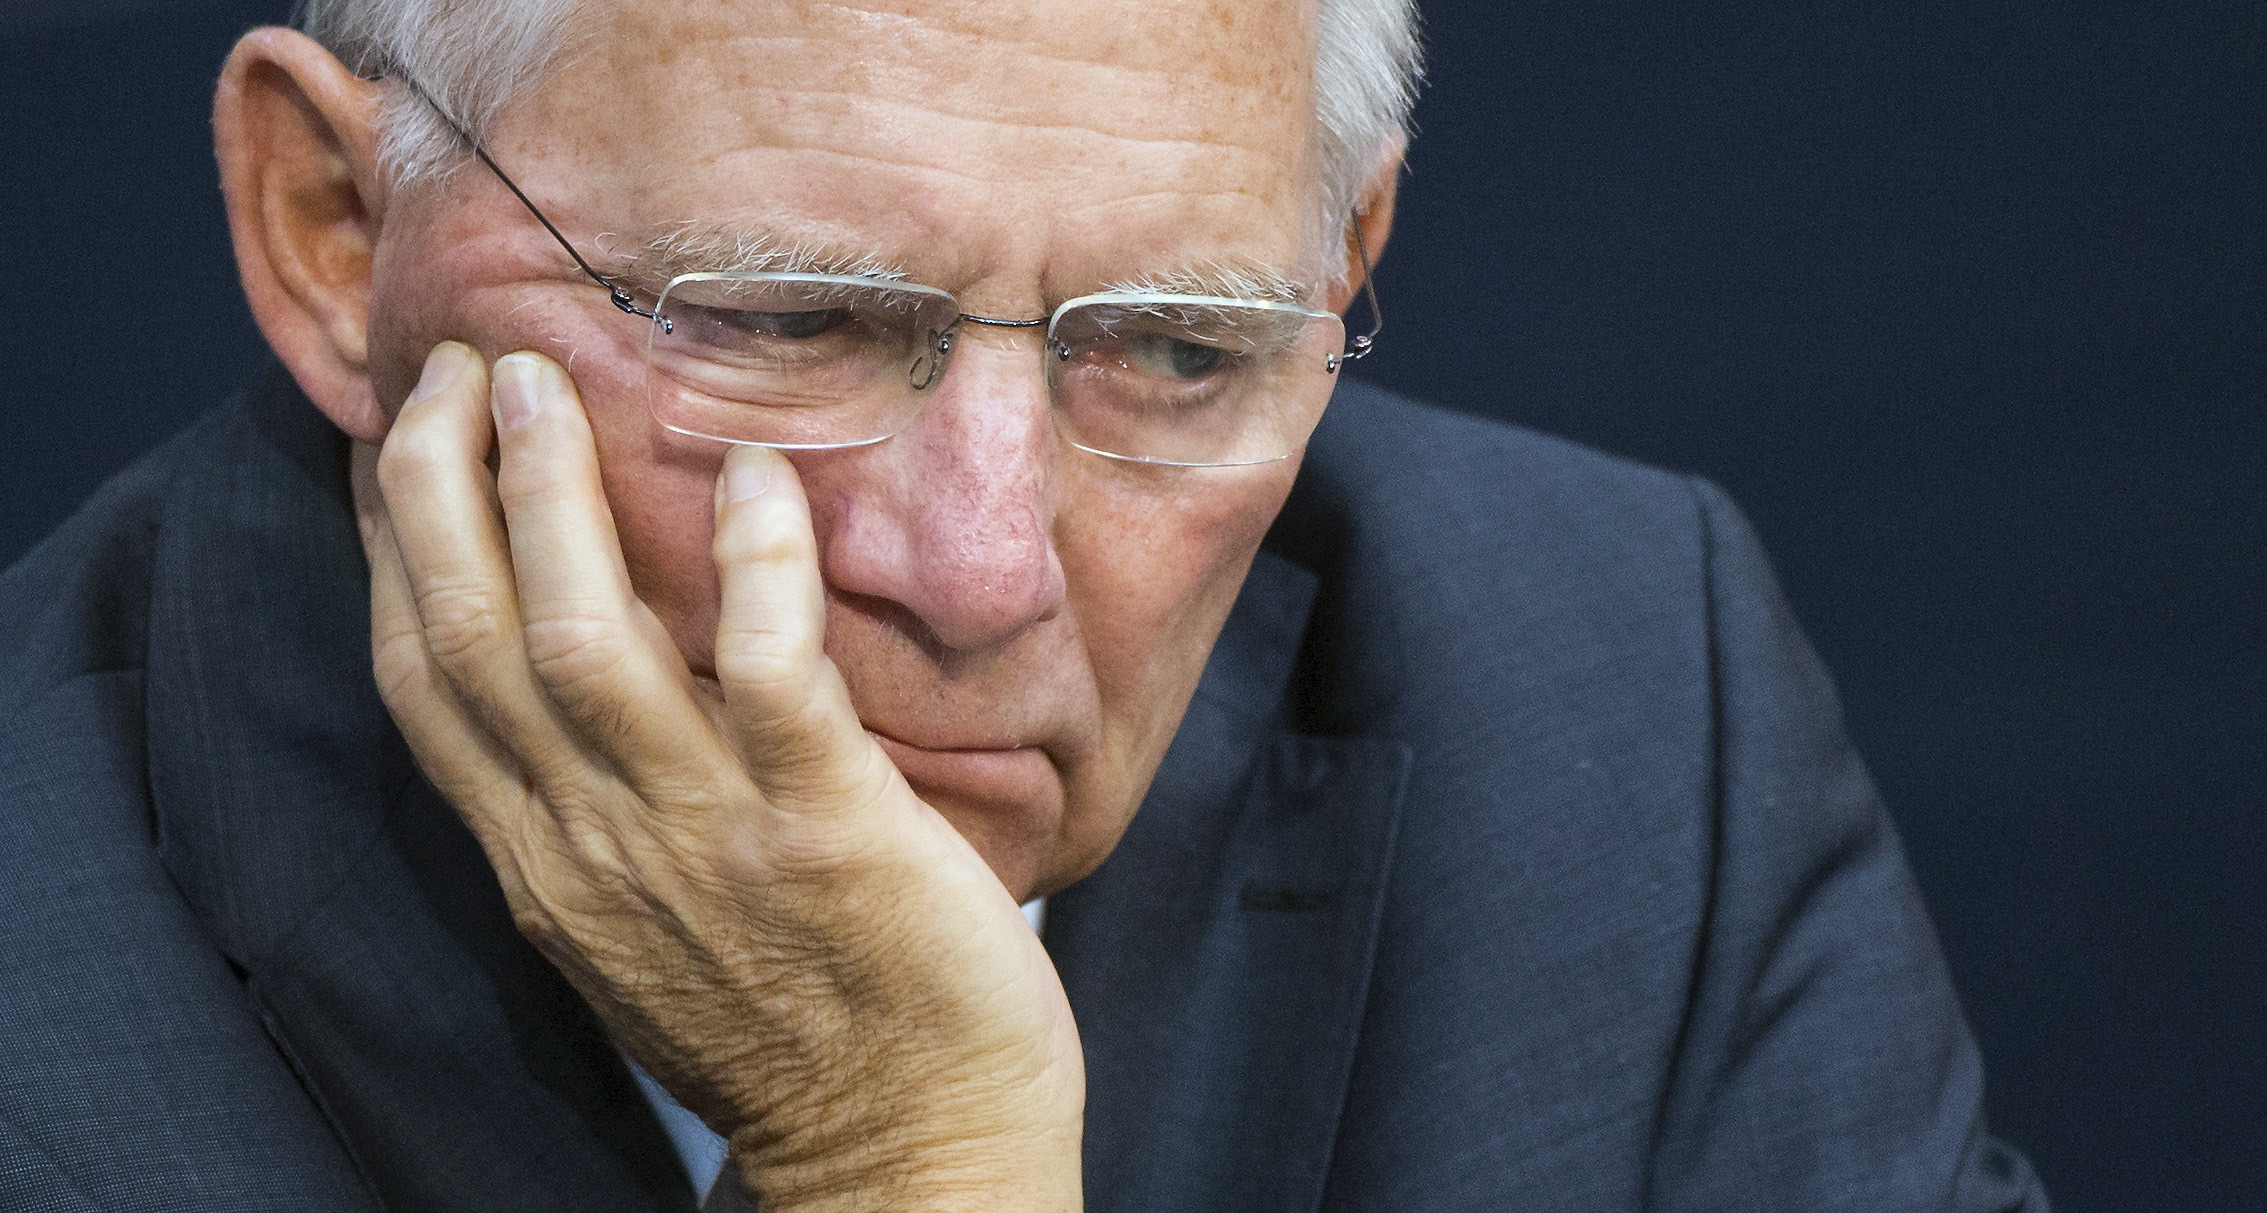 German Finance Minister Schaeuble attends a session of the German lower house of parliament, the Bundestag, in Berlin